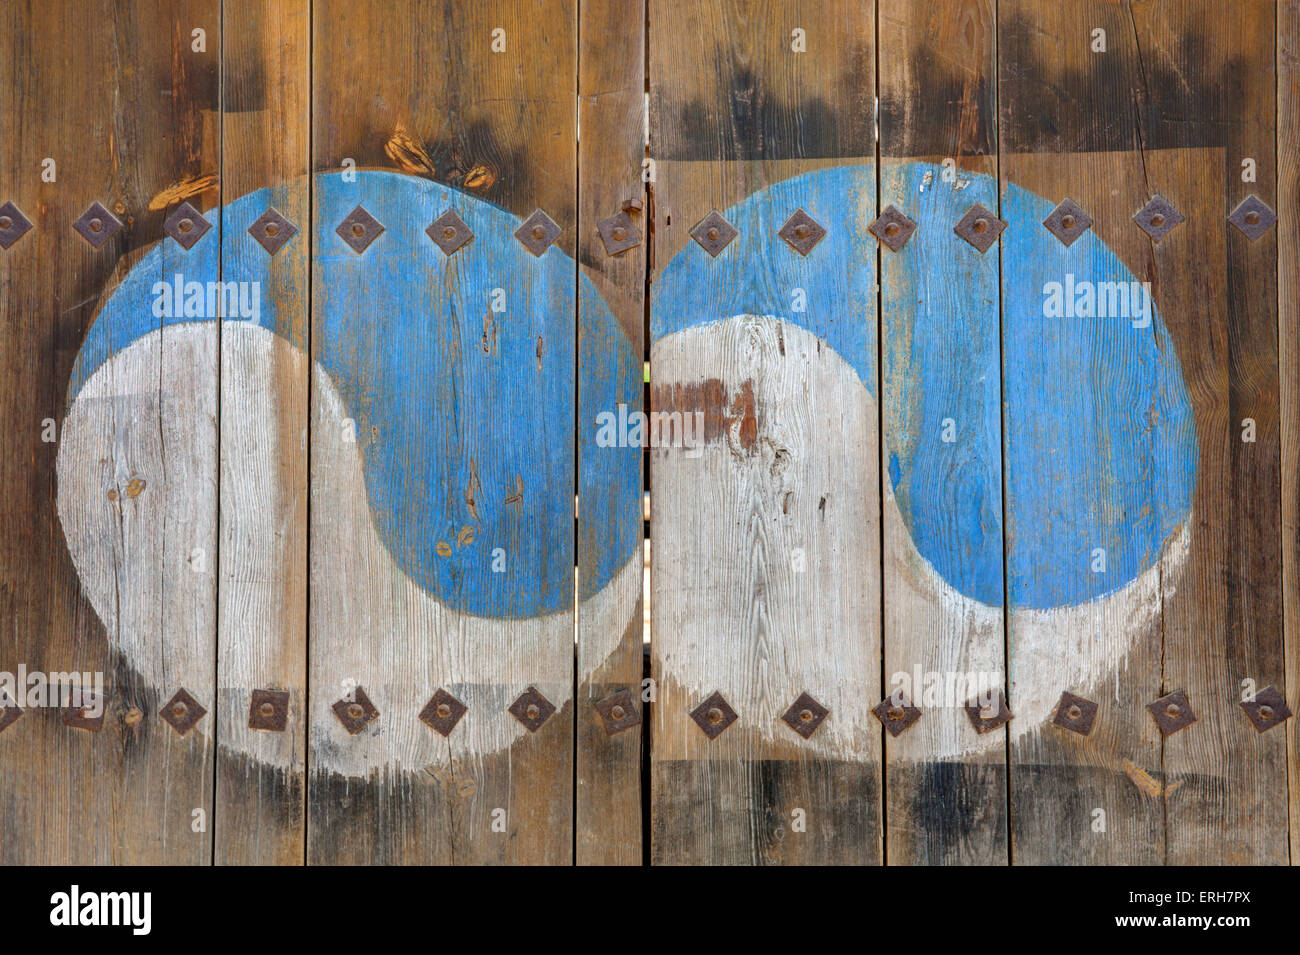 The Ying Yang sign painted on wooden door. Stock Photo